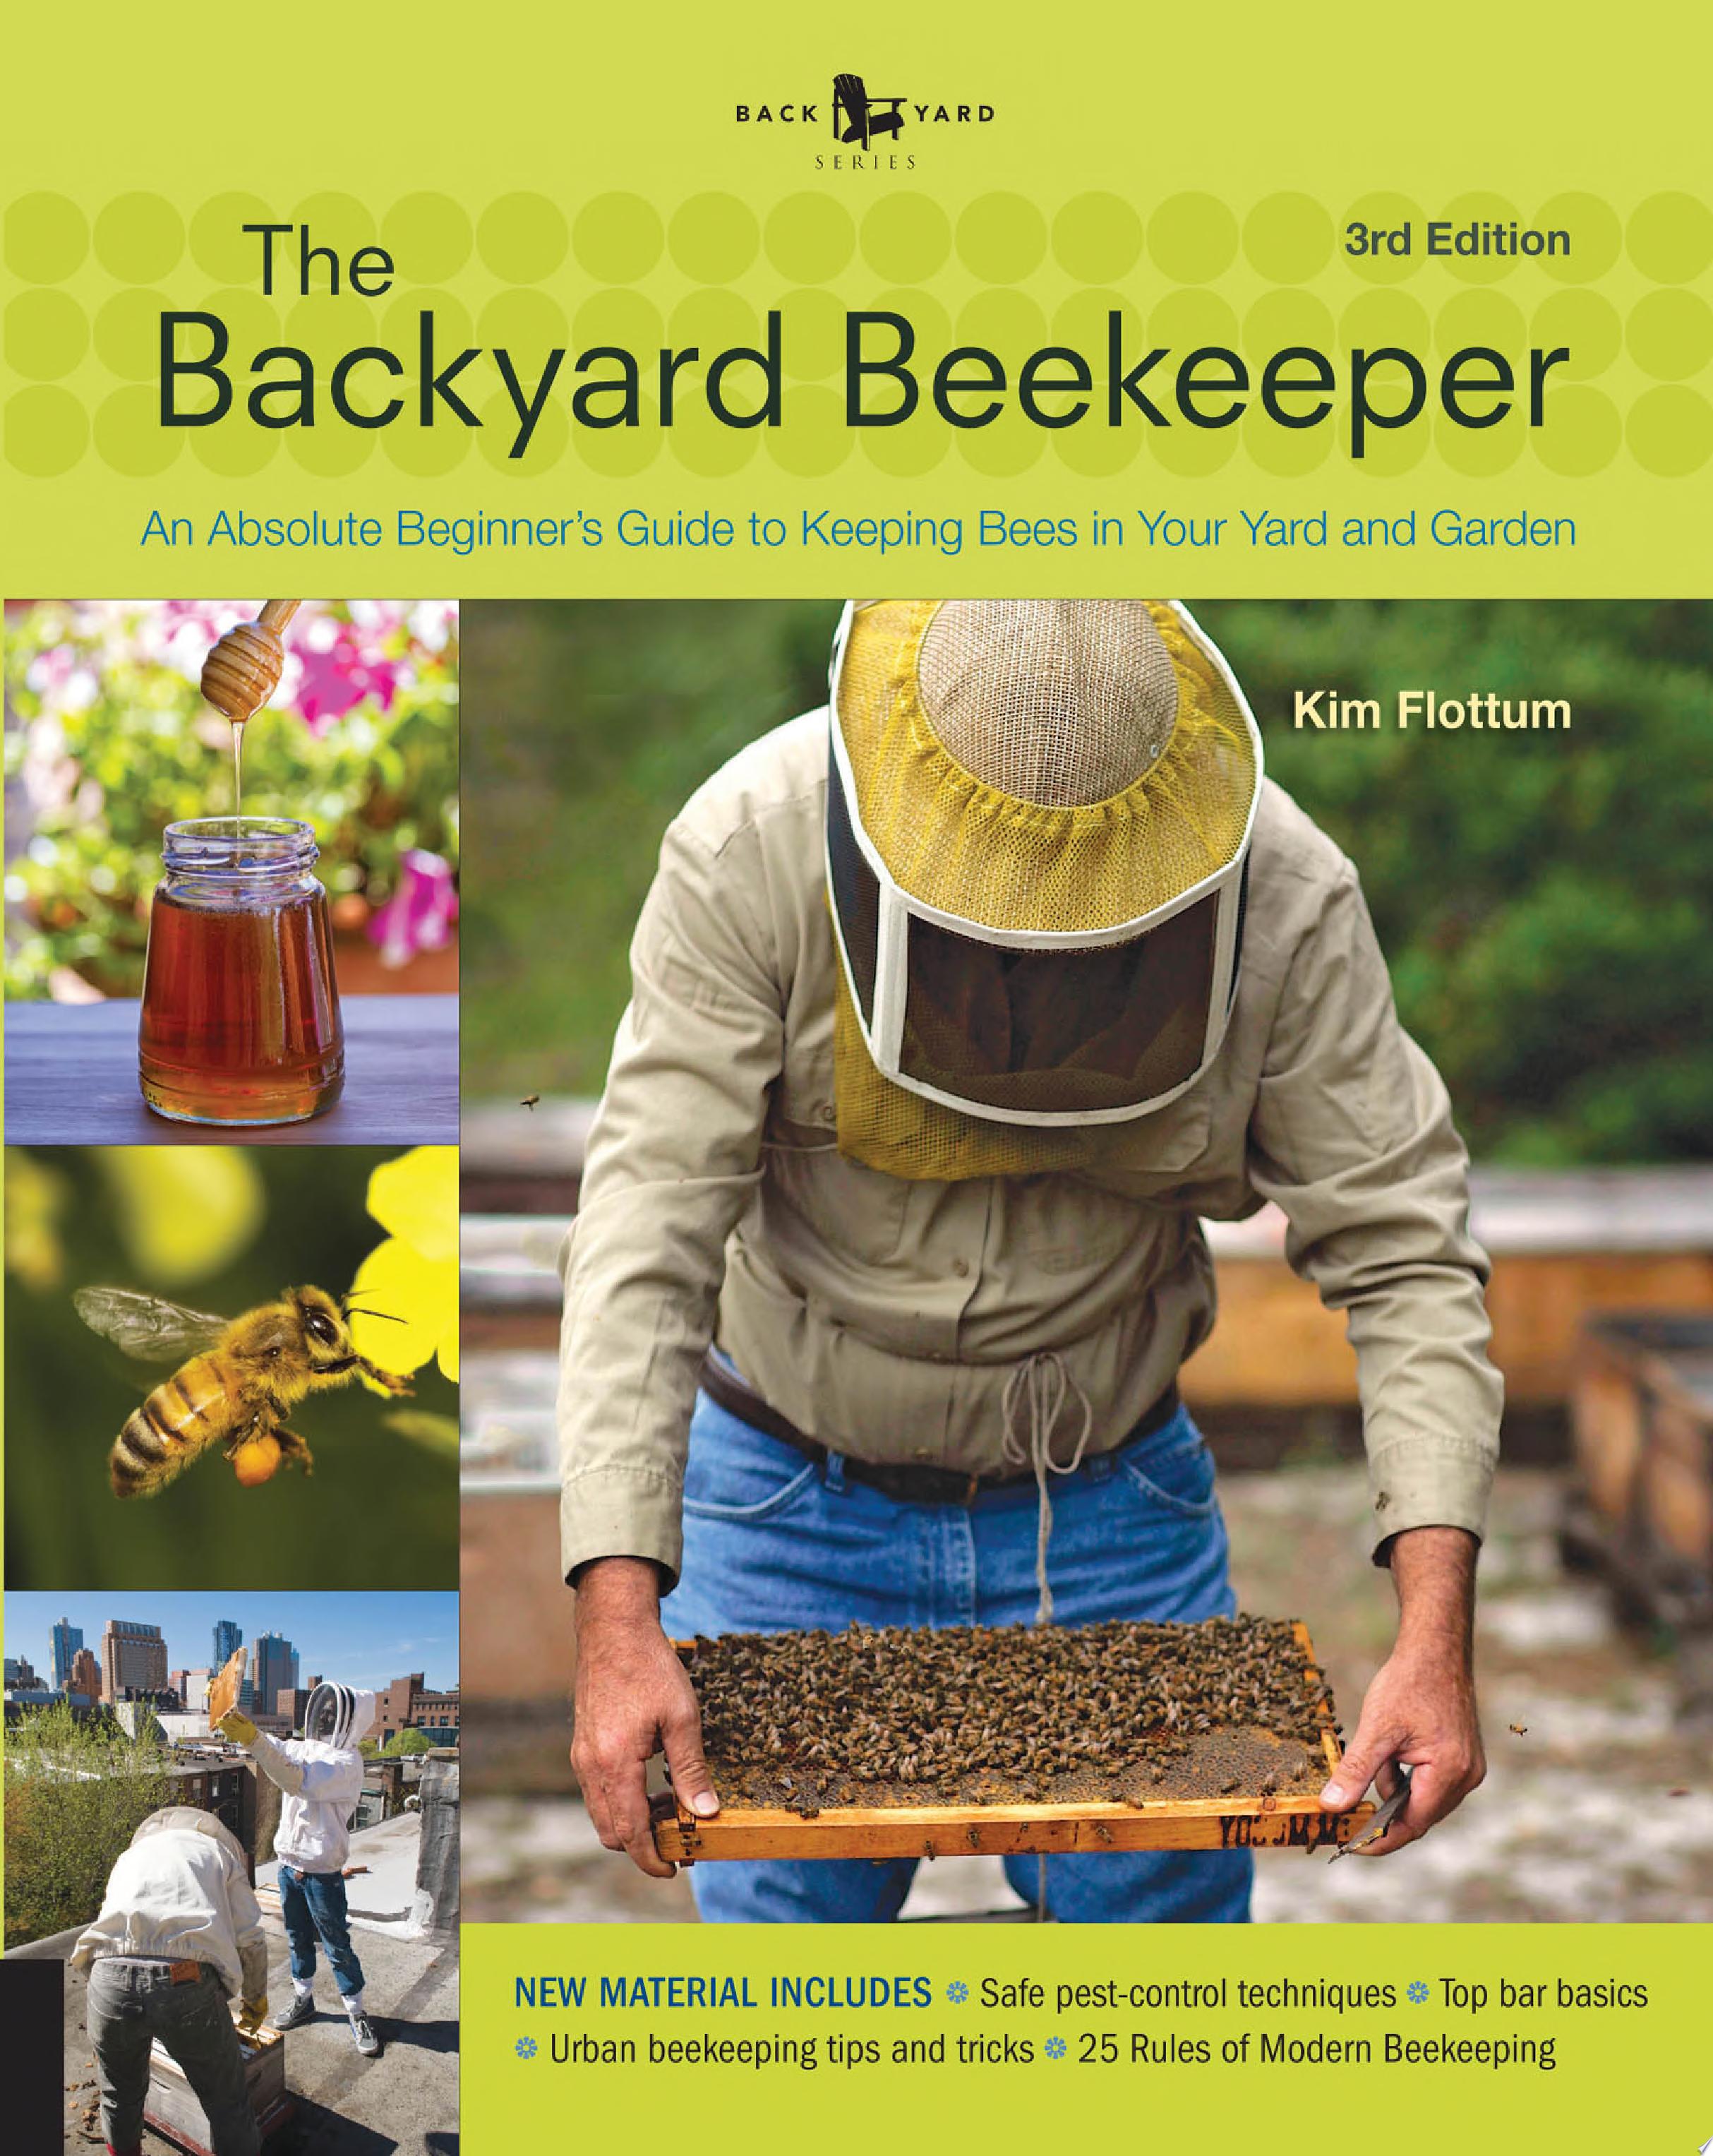 Image for "The Backyard Beekeeper - Revised and Updated, 3rd Edition"